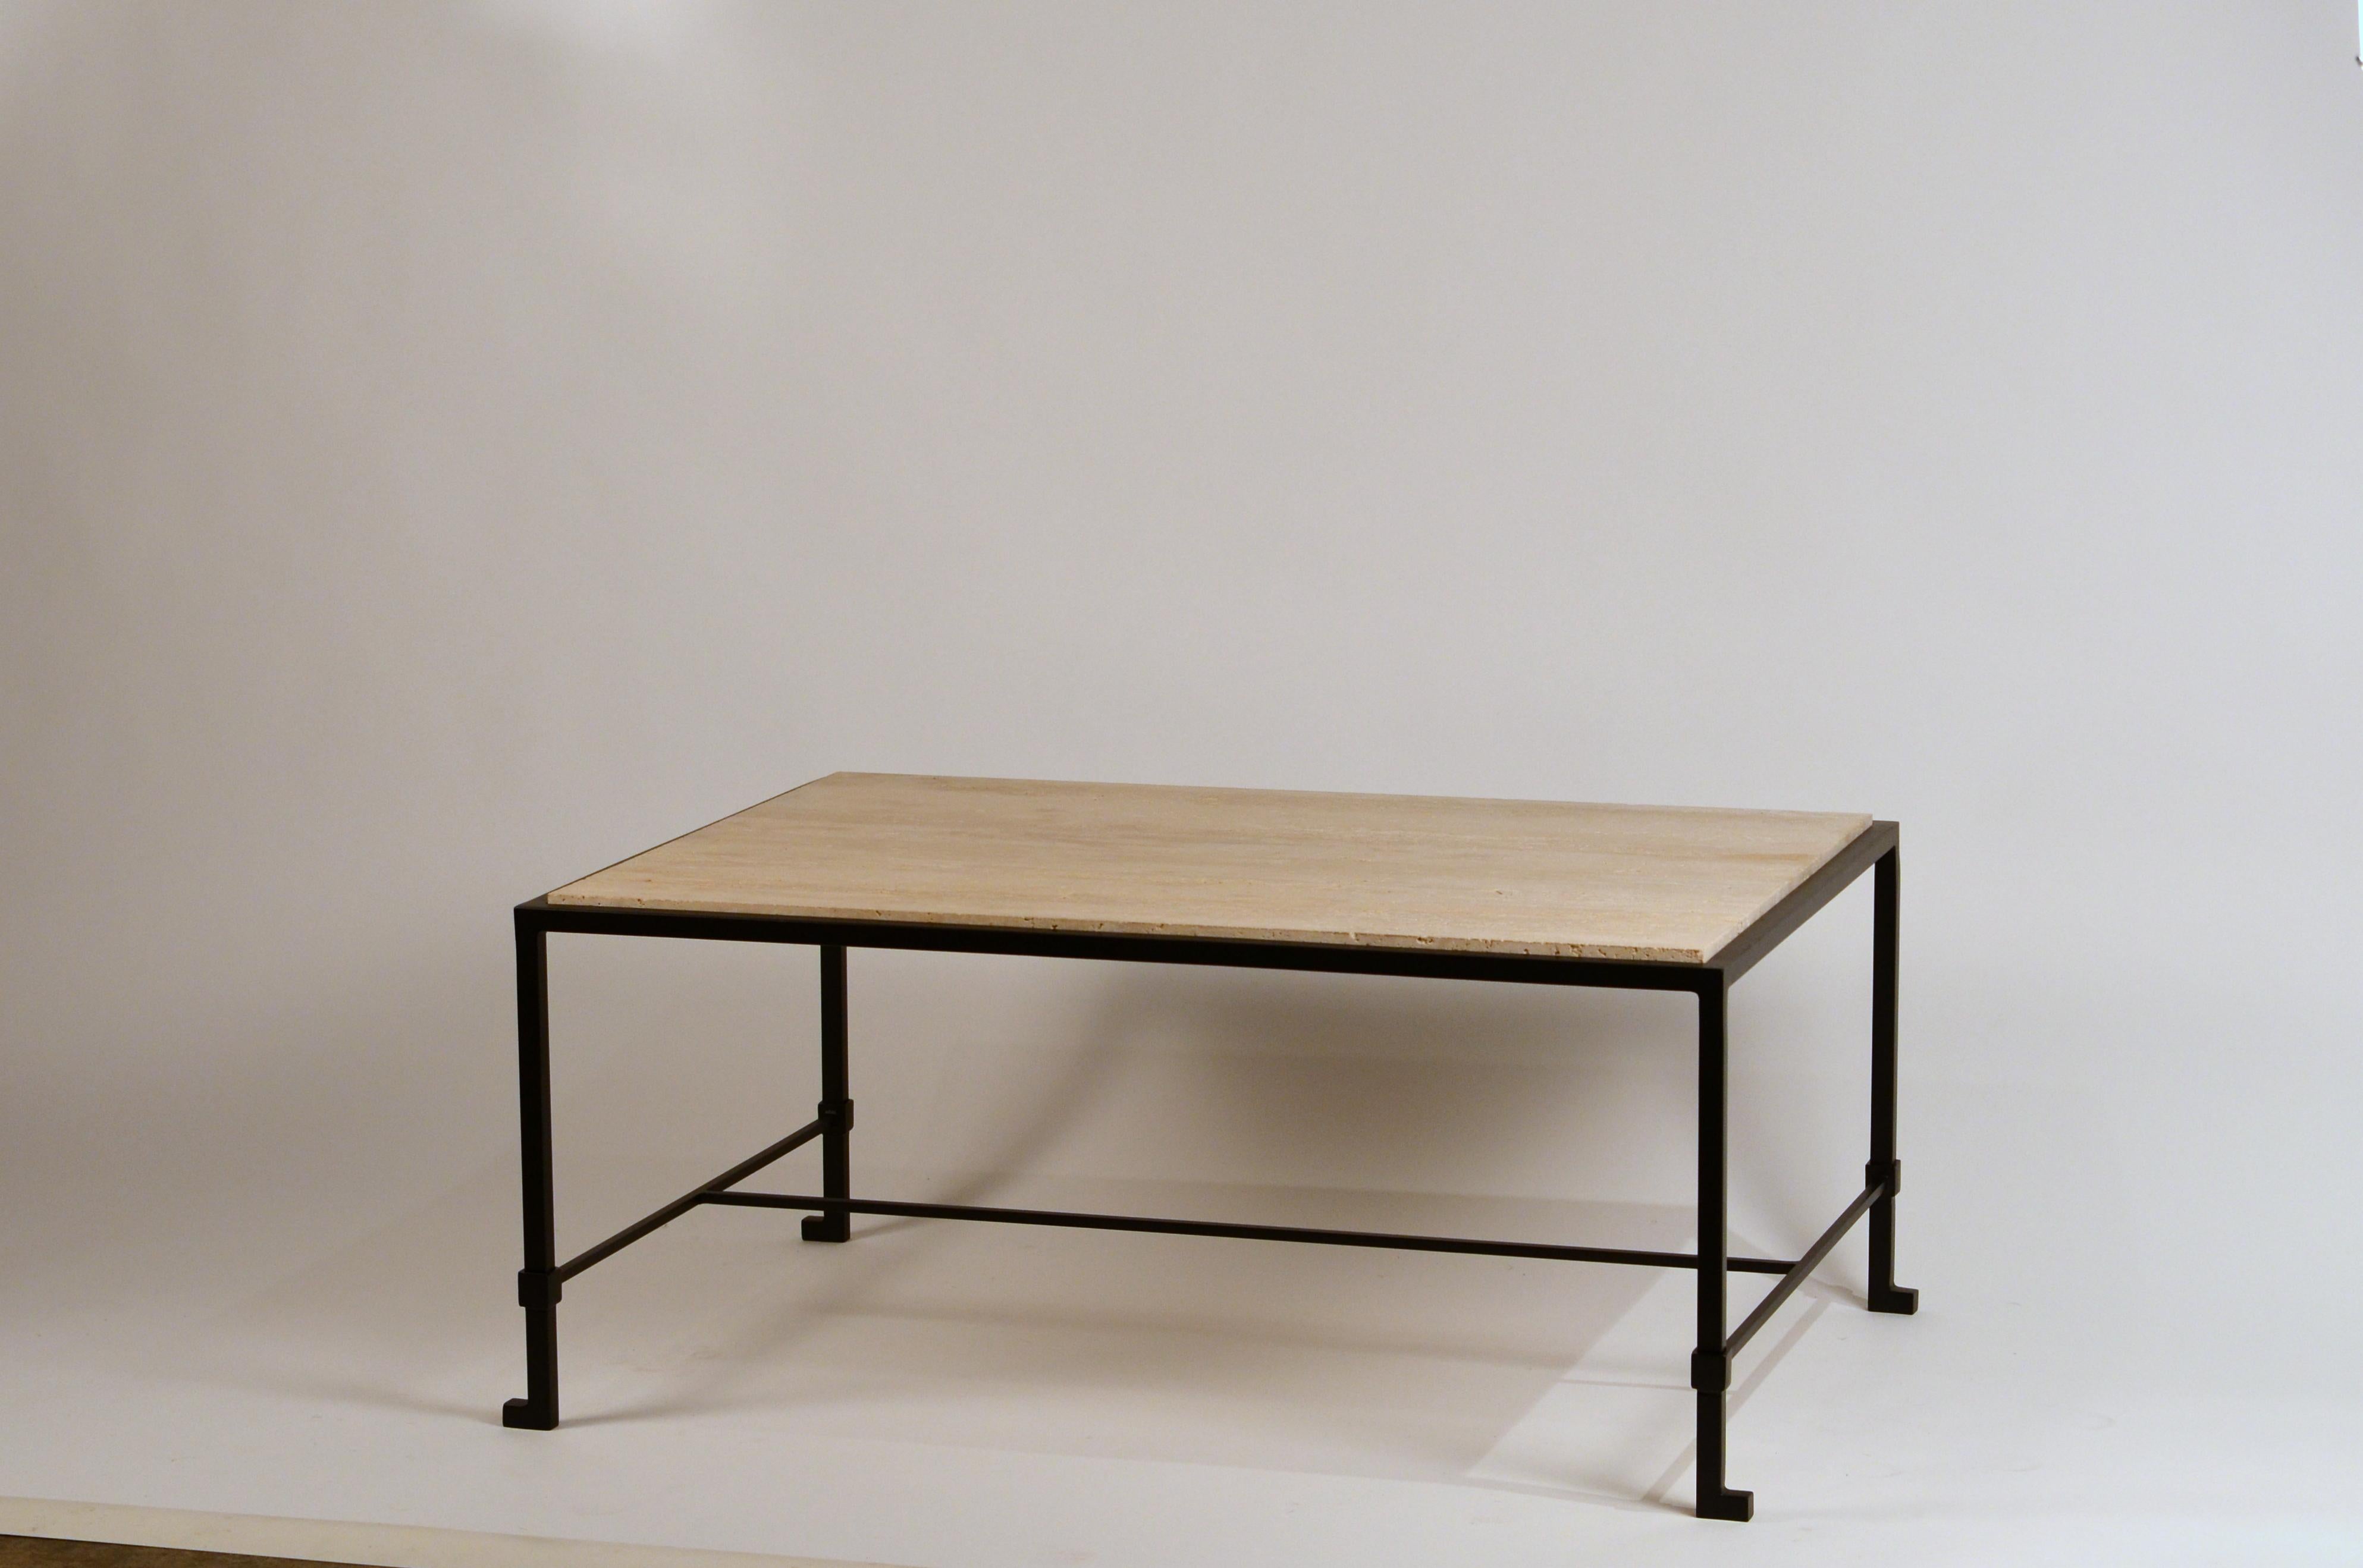 Chic blackened wrought iron and polished raw travertine French 1940s style coffee table. Inspired by the designs of Marc du Plantier and Paul Dupré-Lafon. Great proportions but custom sizes available as well.